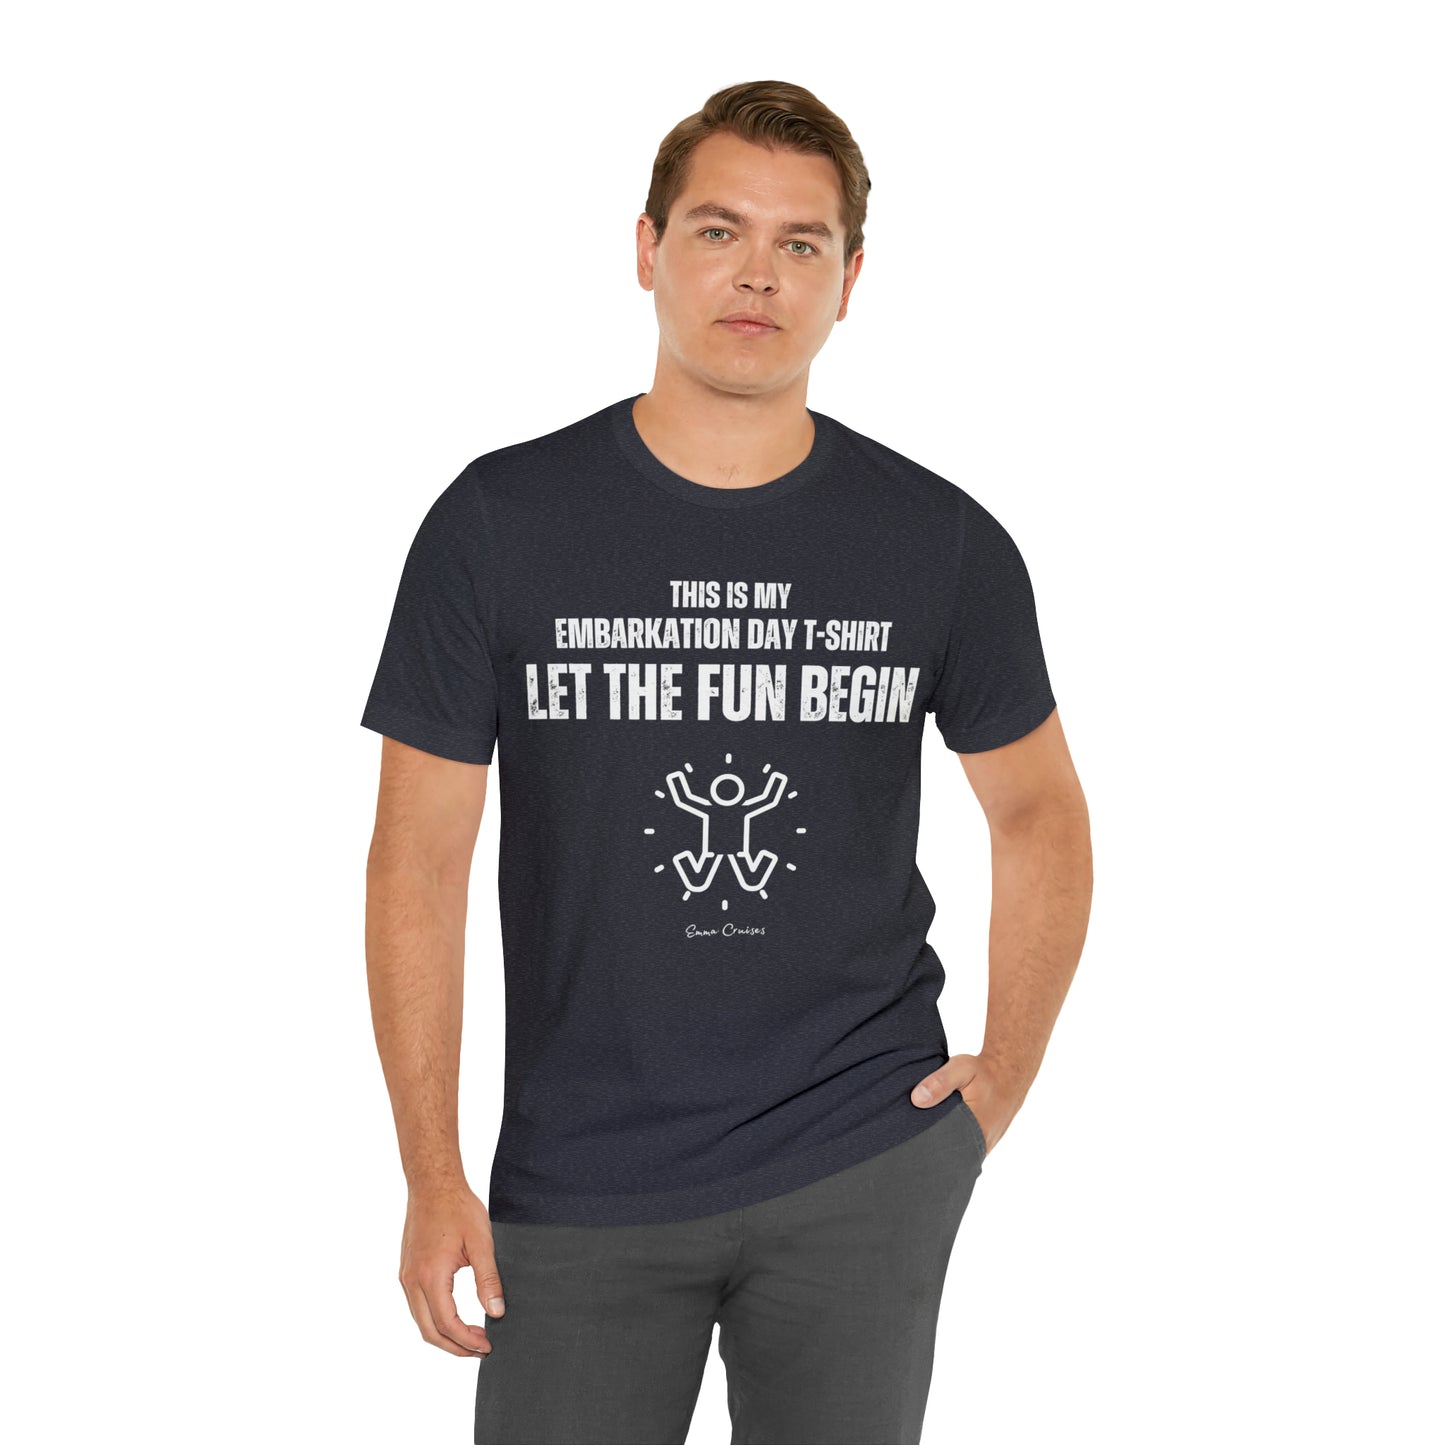 This is My Embarkation Day T-Shirt - UNISEX T-Shirt